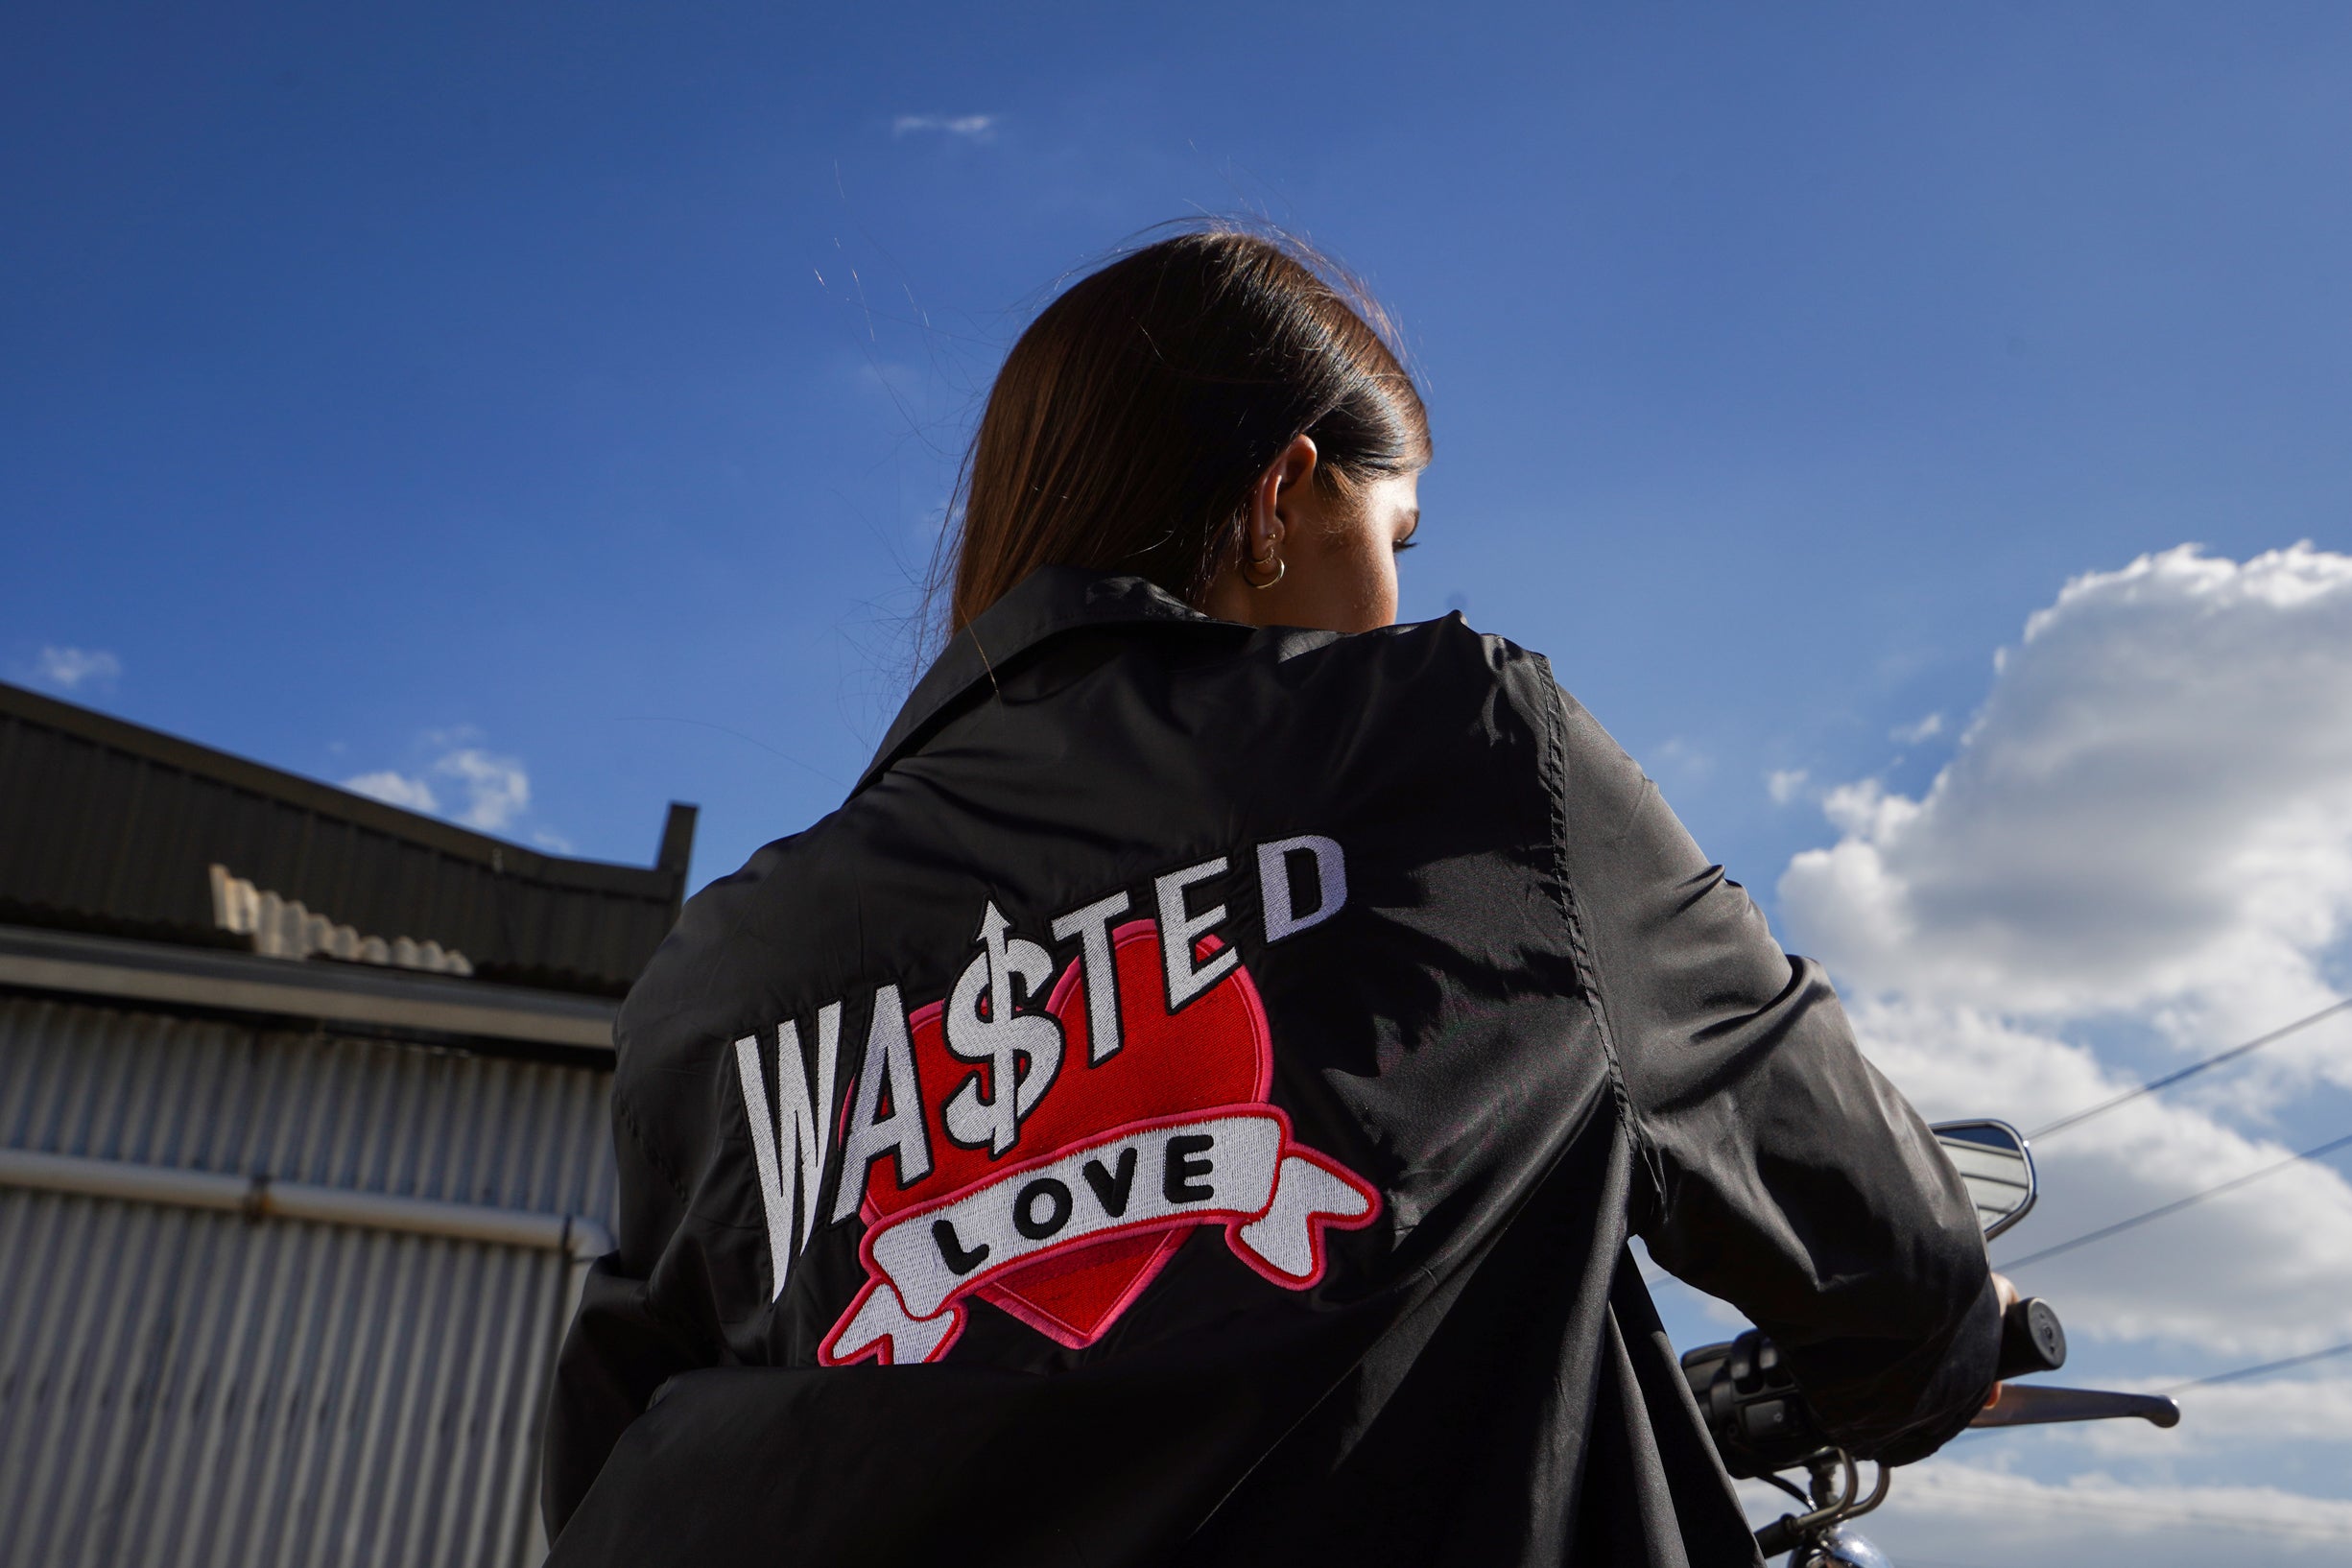 Wasted Love Jacket